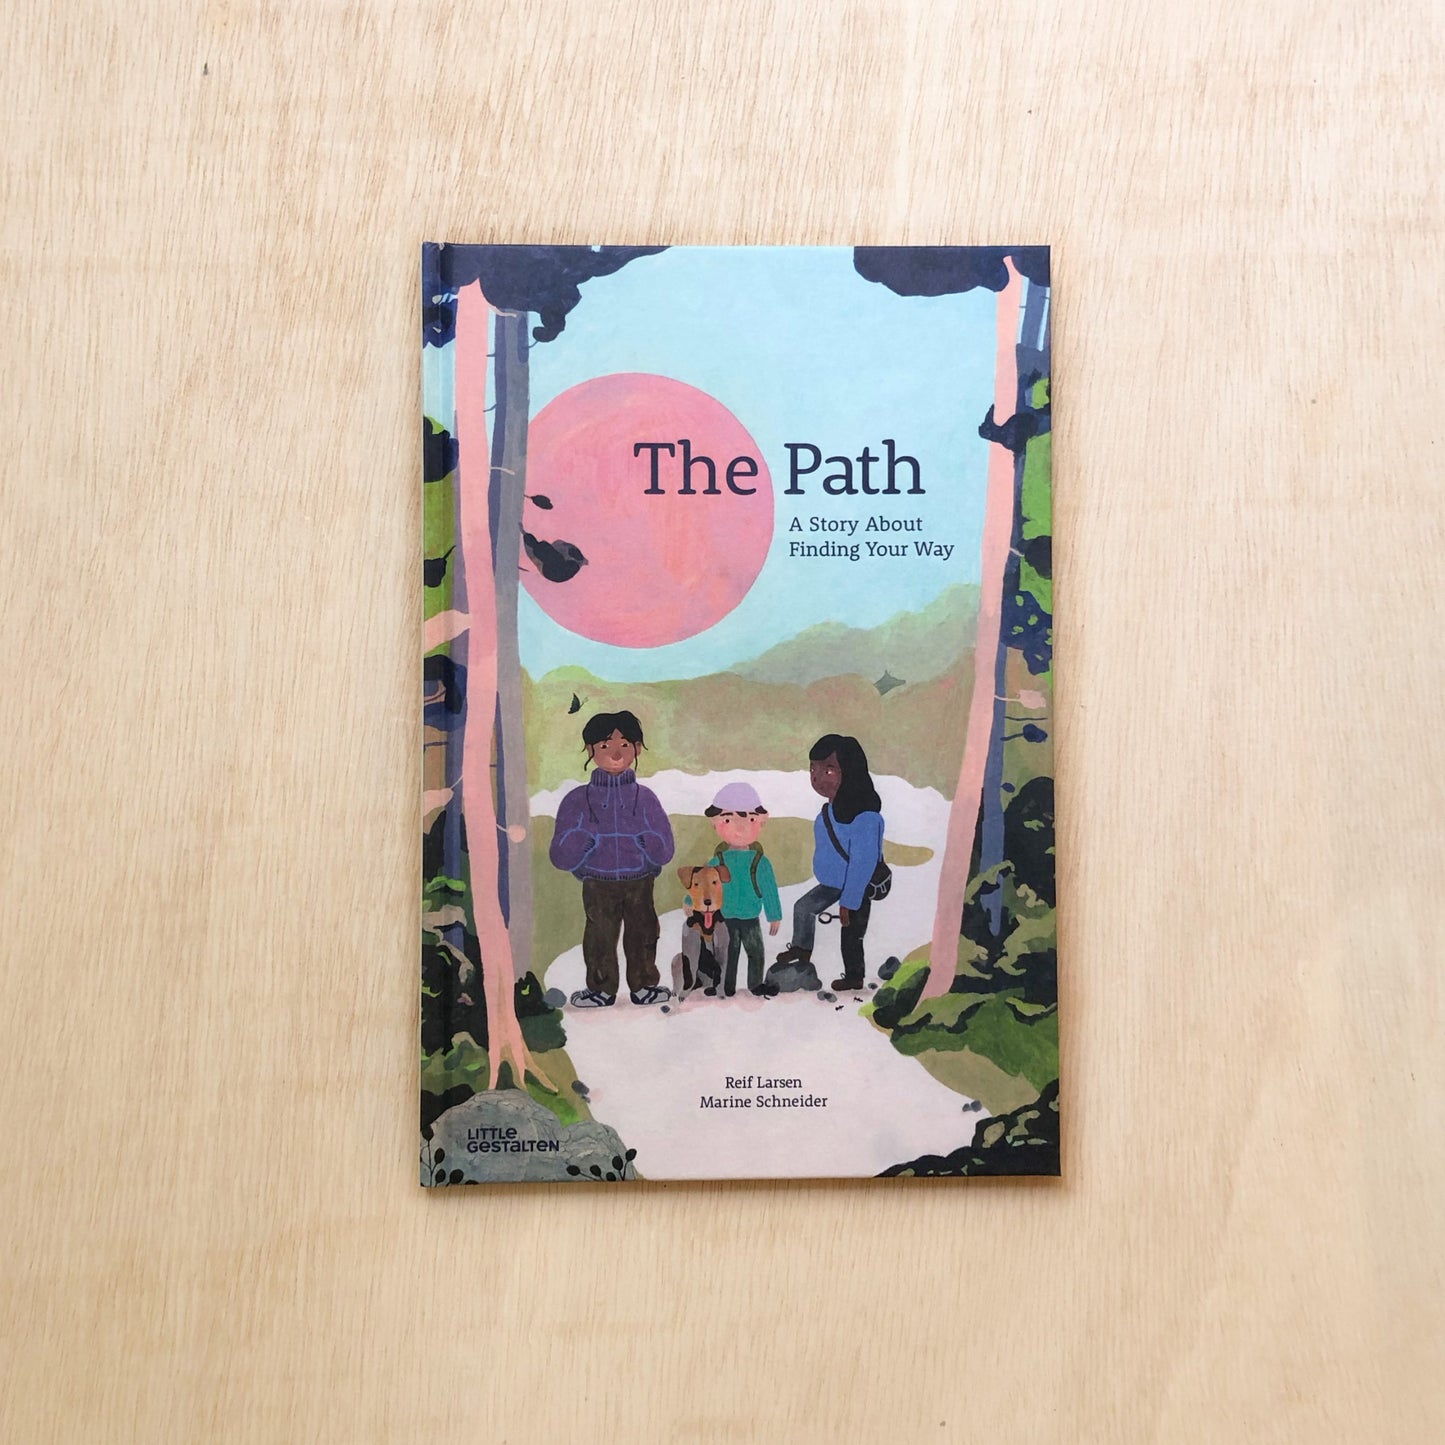 The Path - A Story about Finding Your Way